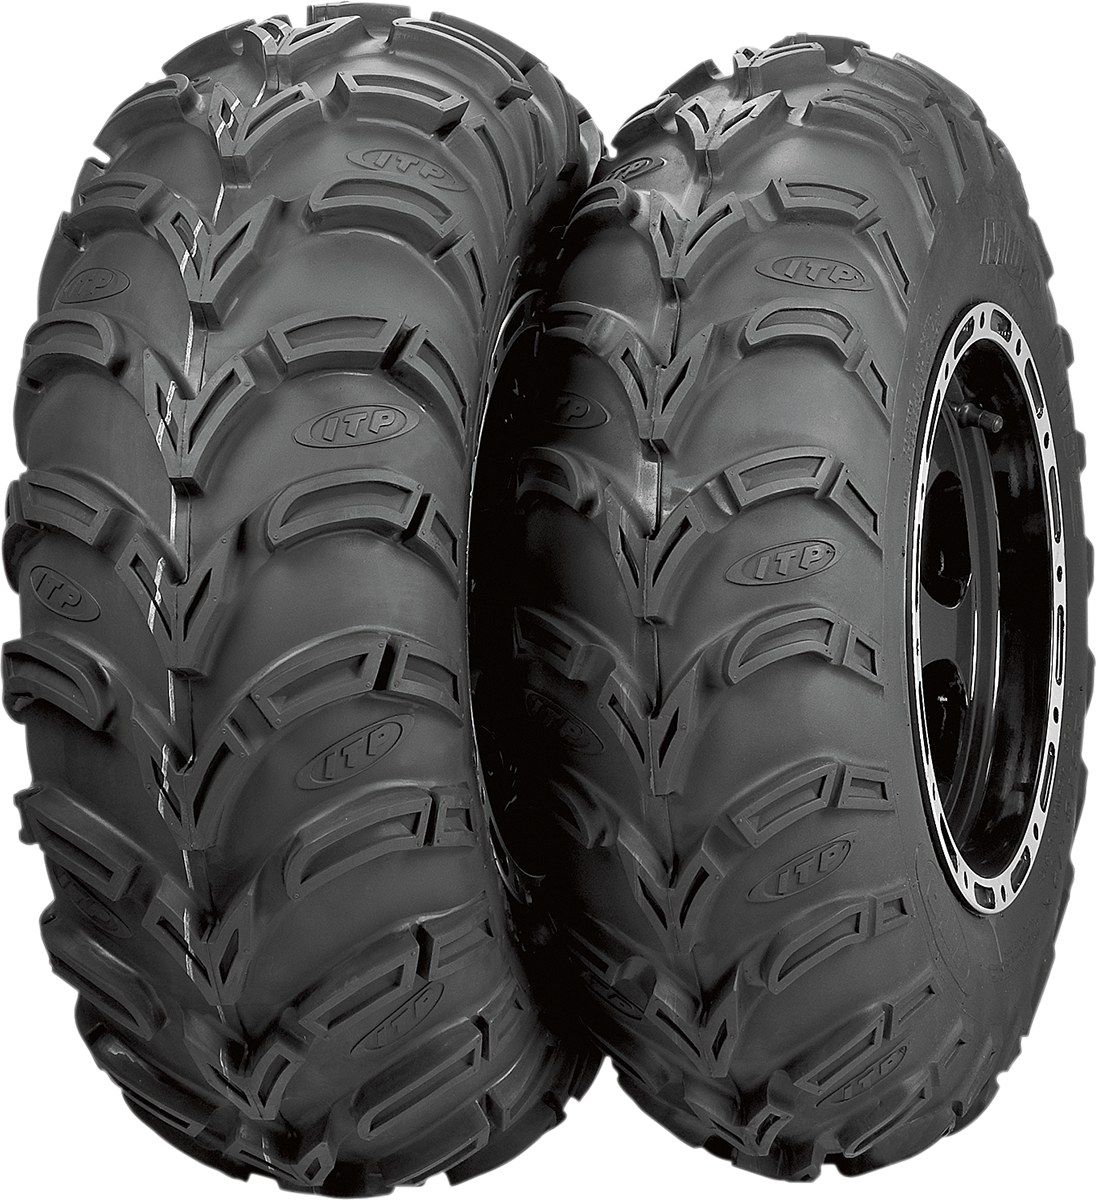 ITP Tire - Mud Lite AT - Front/Rear - 22x8-10 - 6 Ply 56A3A8